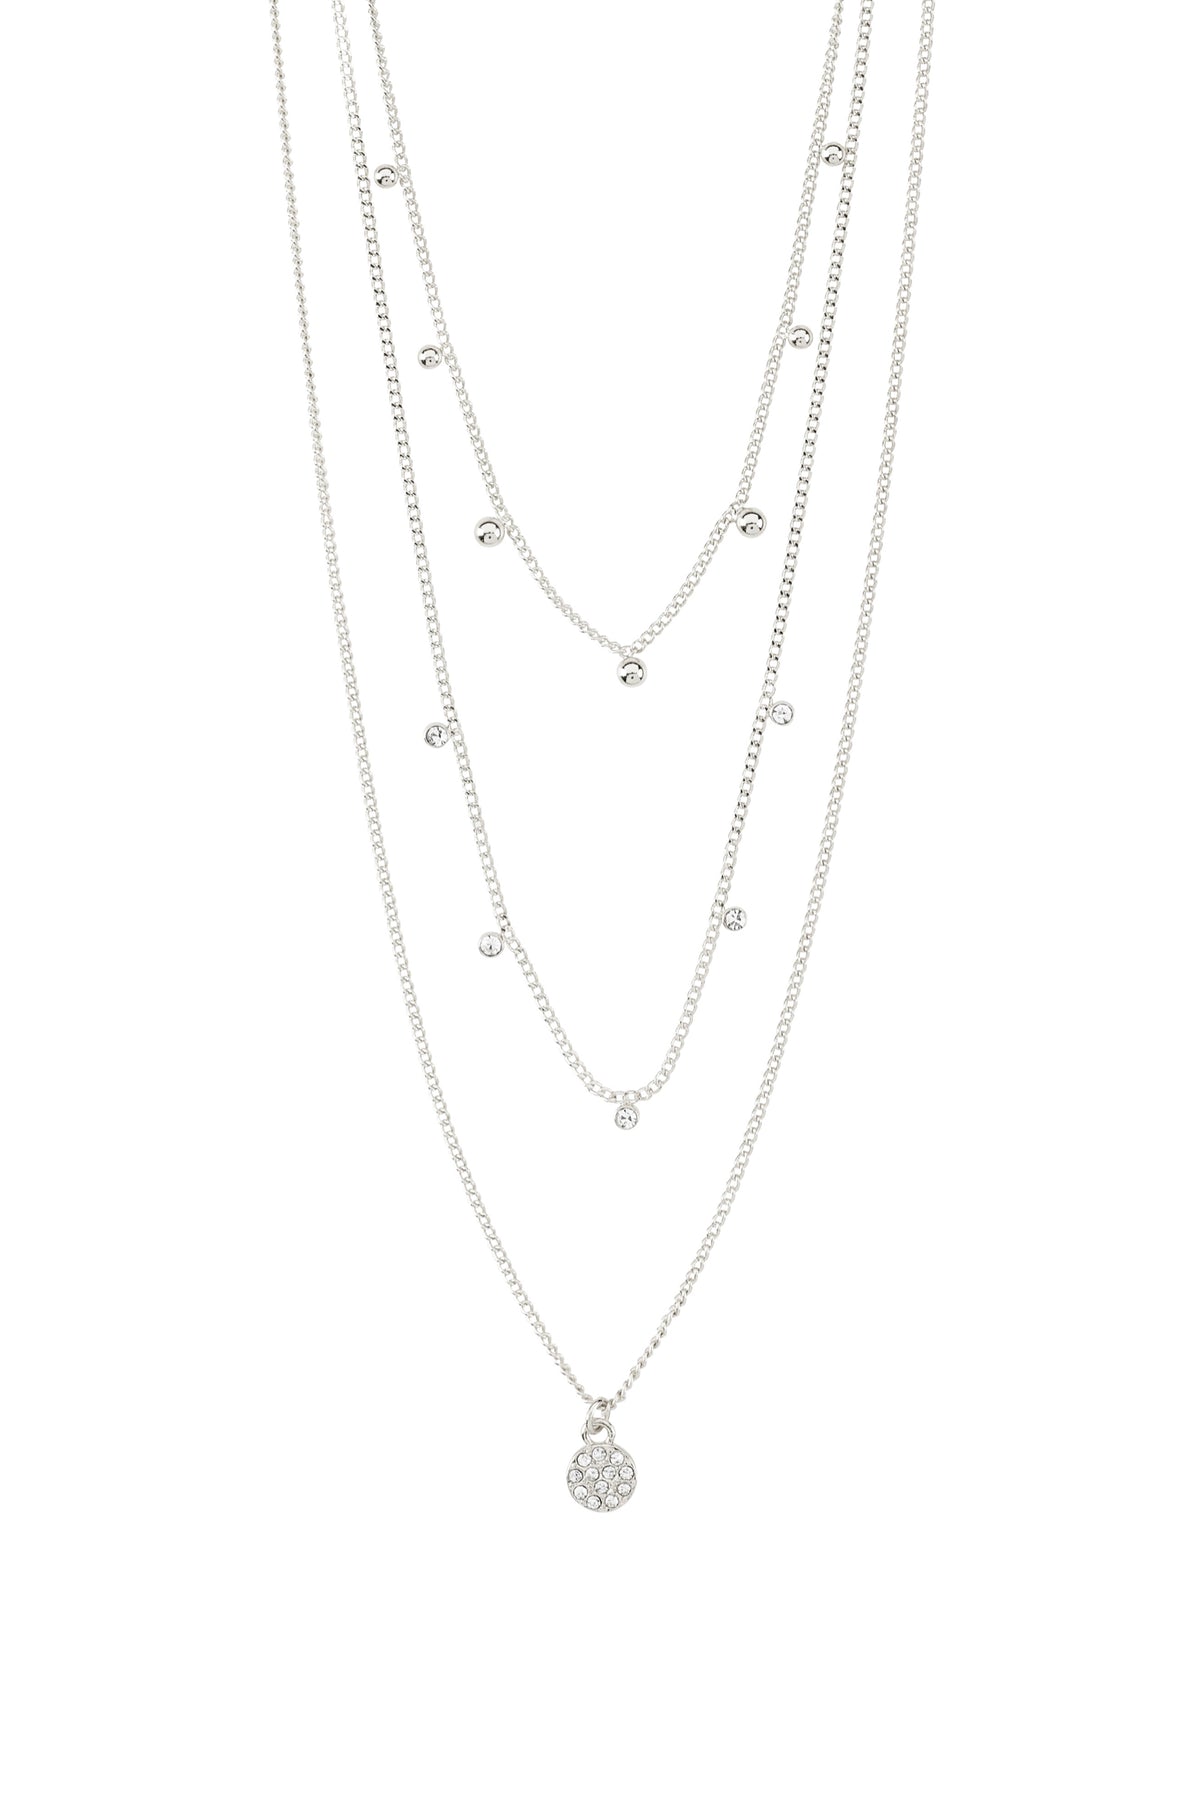 Chayenne Recycled Crystal Necklace - Silver Plated